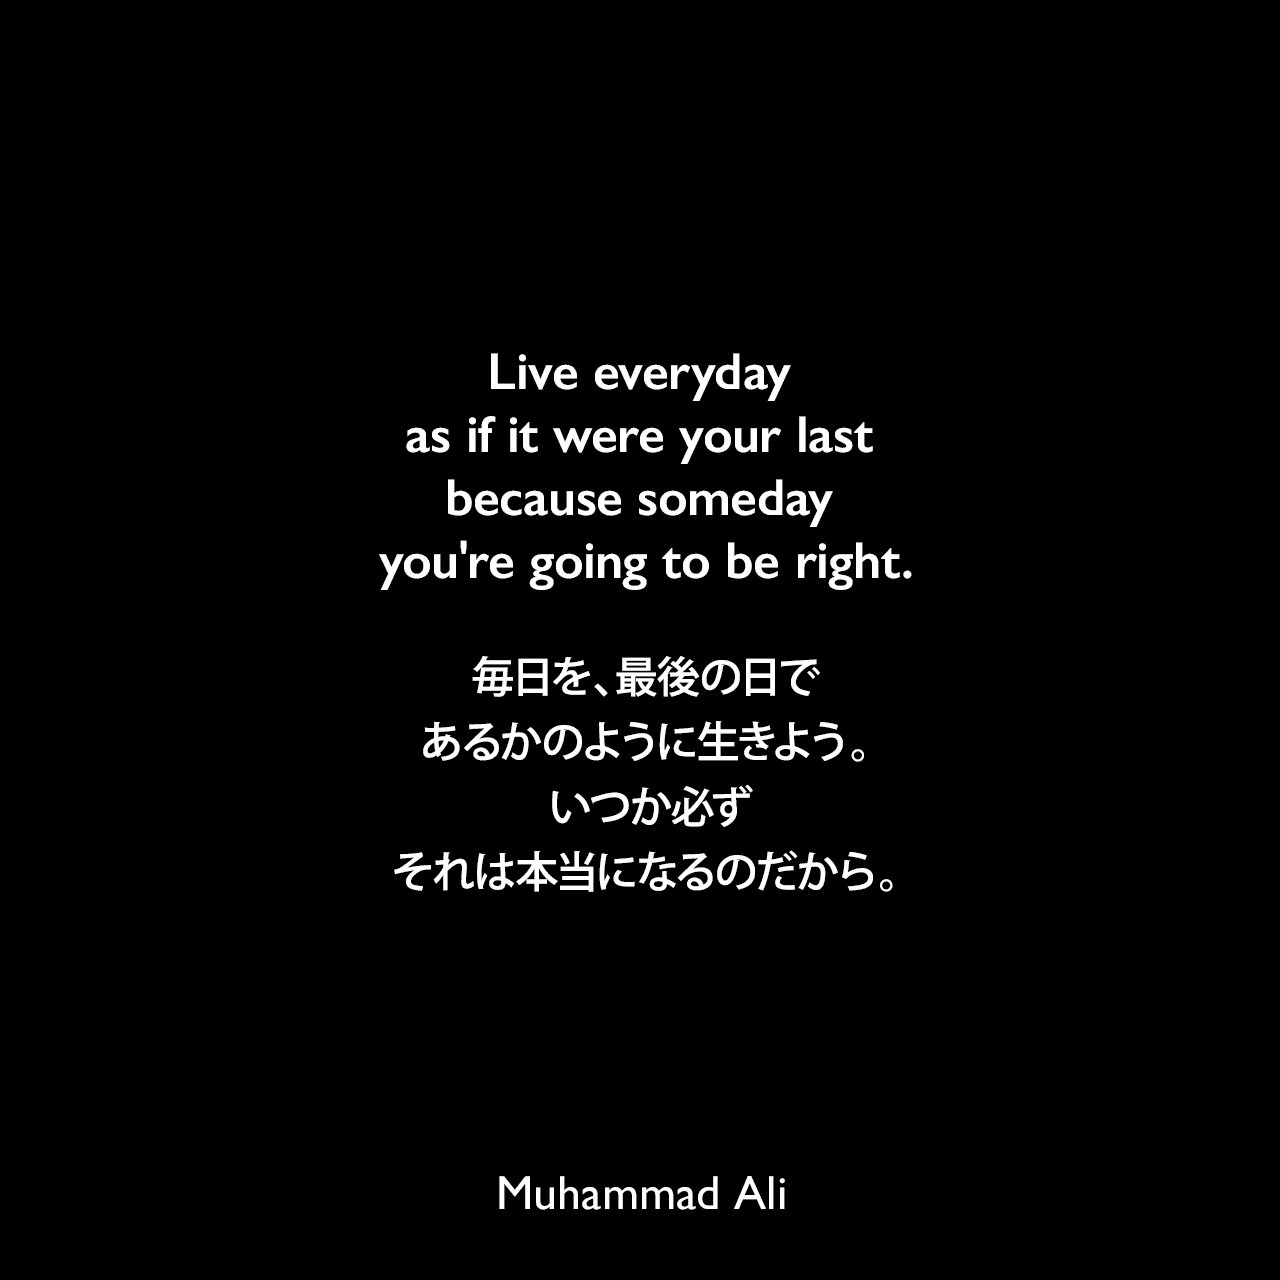 Live everyday as if it were your last because someday you're going to be right.毎日を、最後の日であるかのように生きよう。 いつか必ず、それは本当になるのだから。Muhammad Ali